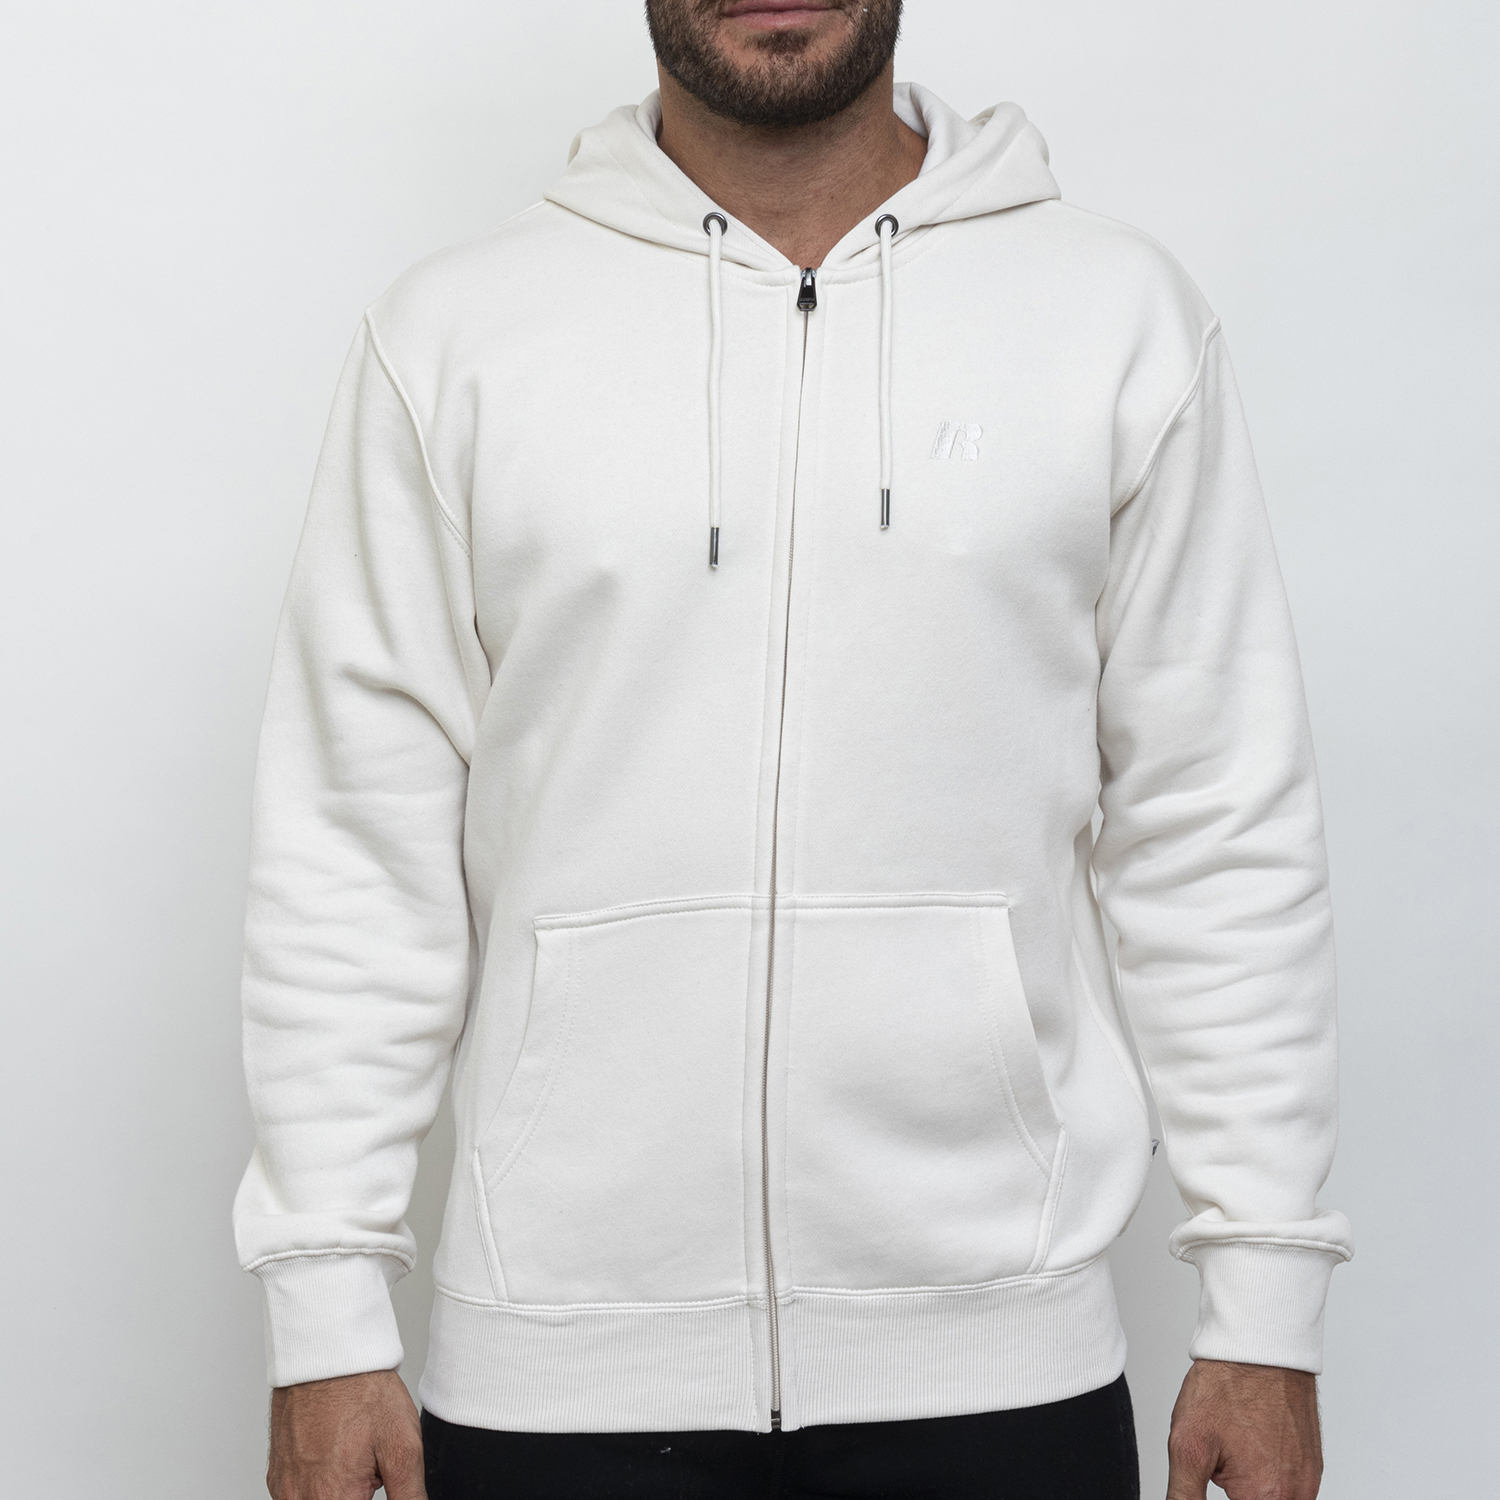 Russell Athletic - ZIP THROUGH HOODY - WHITE SAND